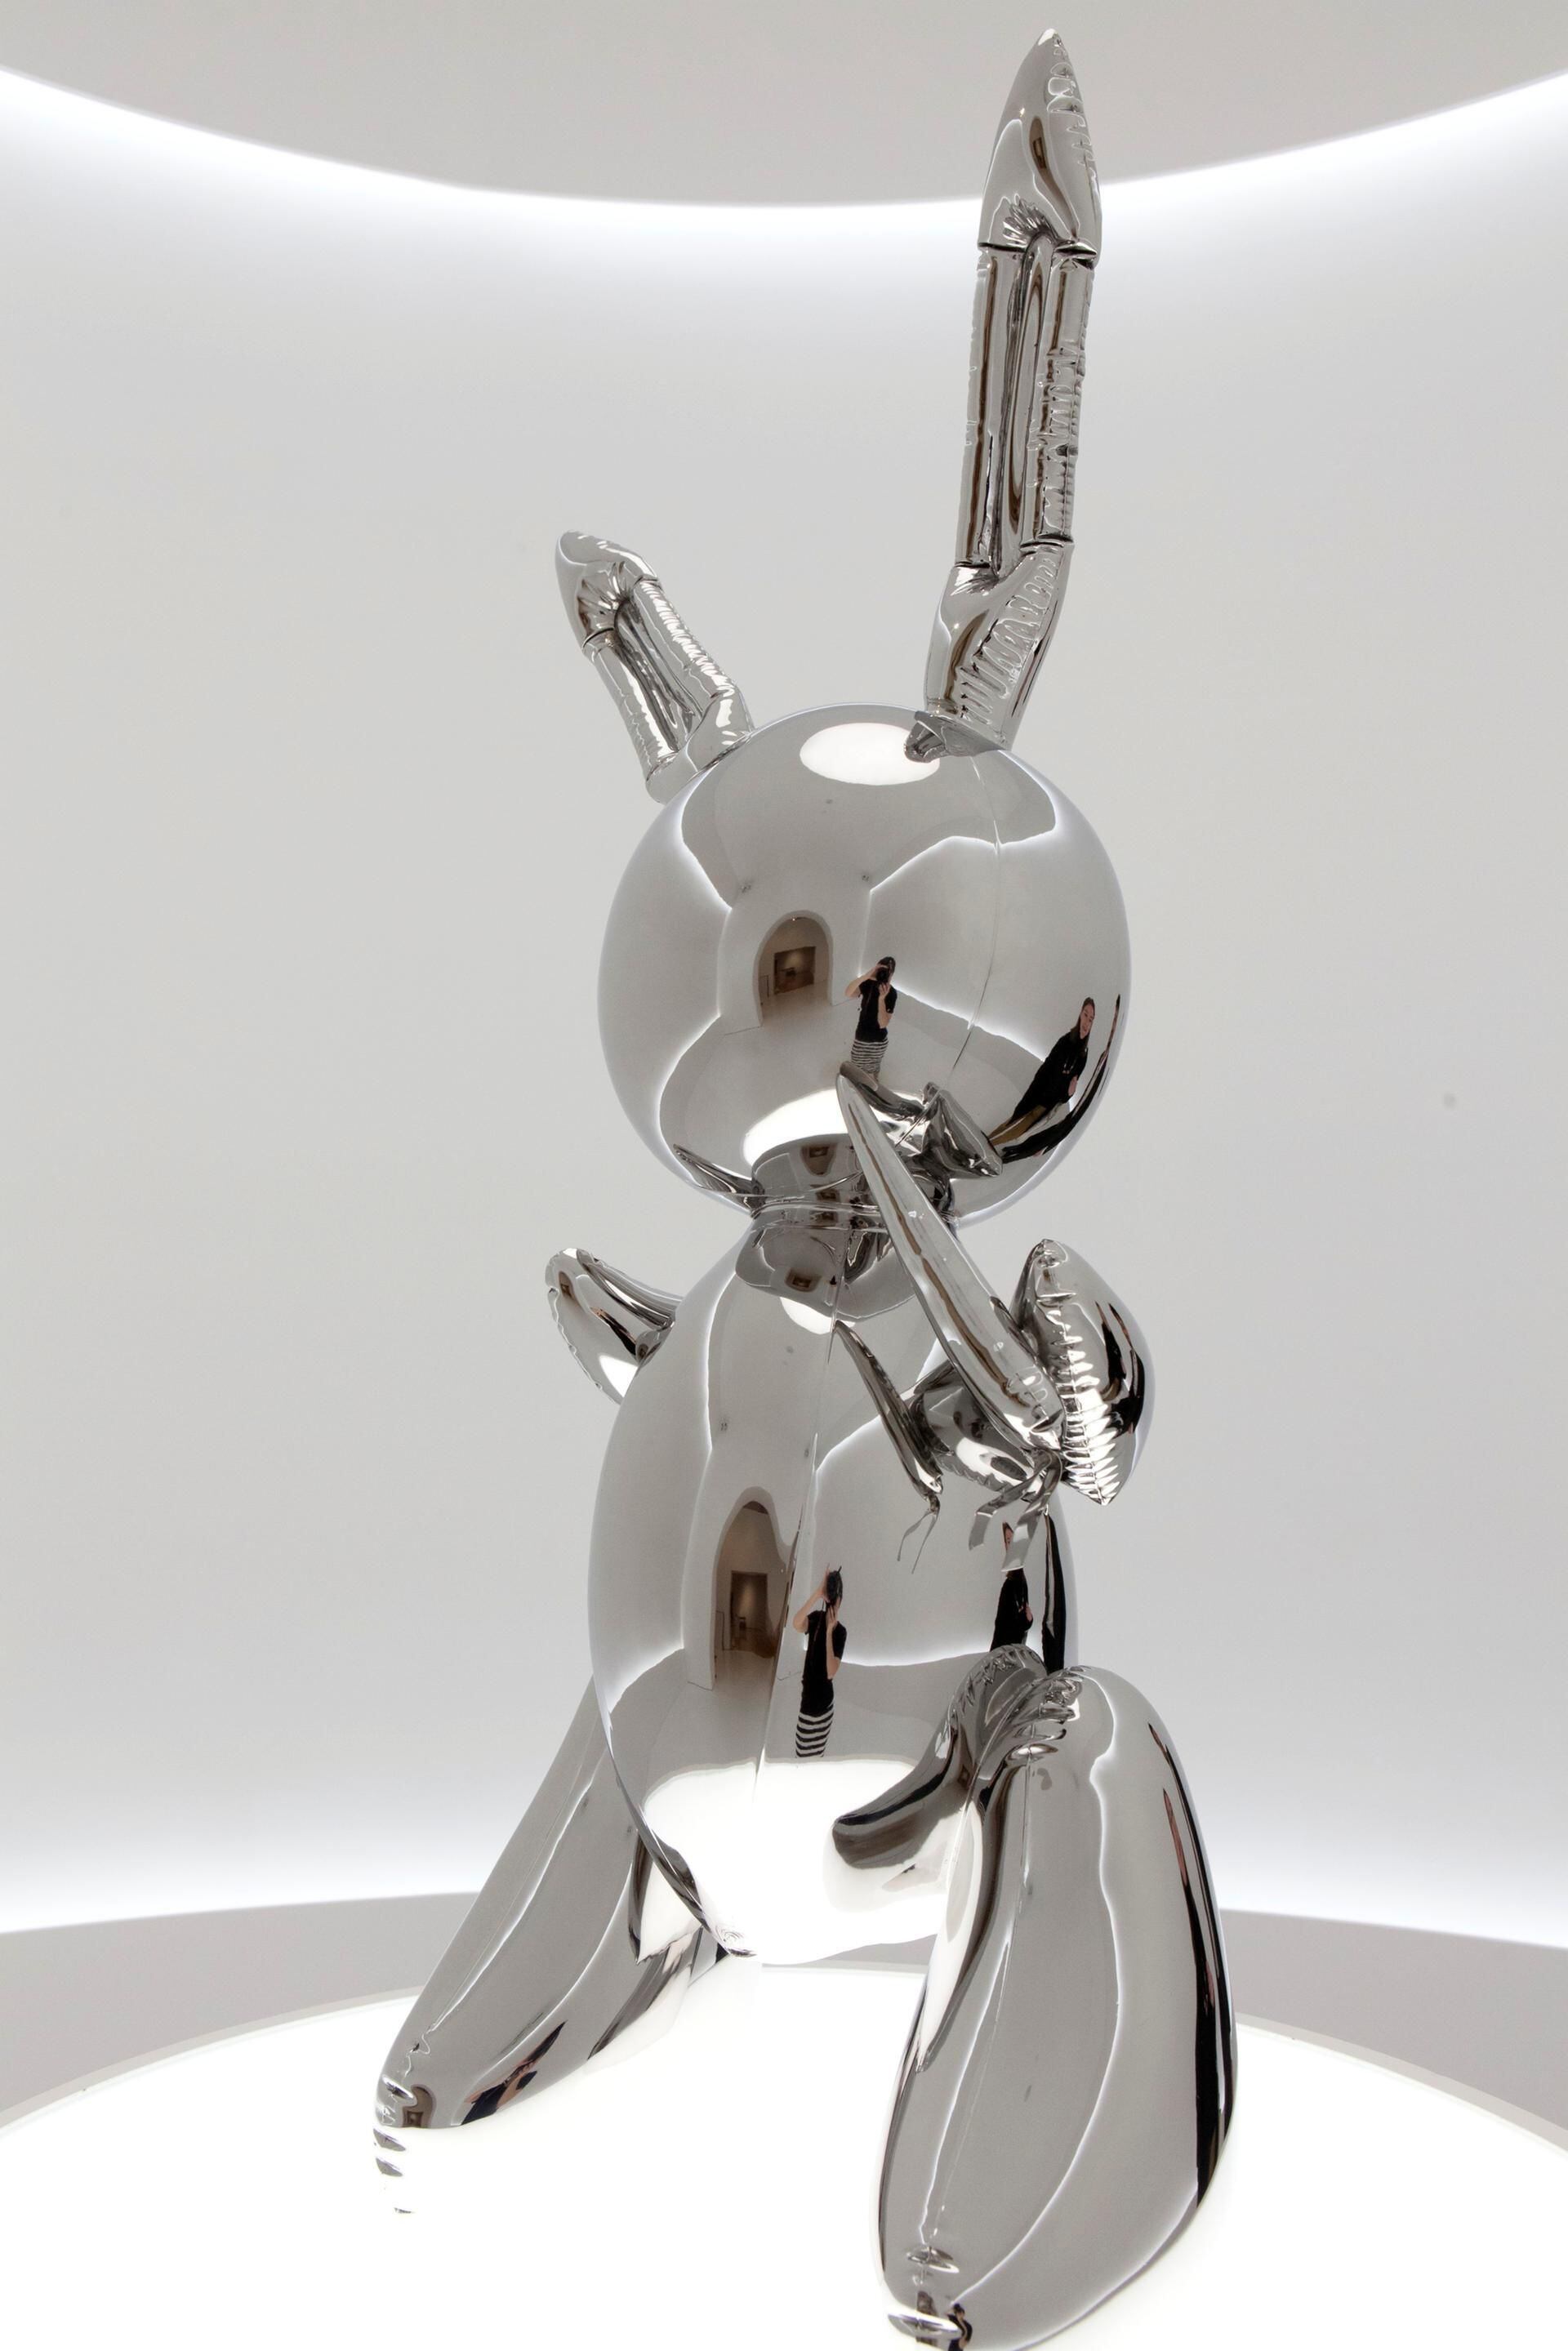 Jeff Koons breaks records as bunny sculpture sells for $91 million